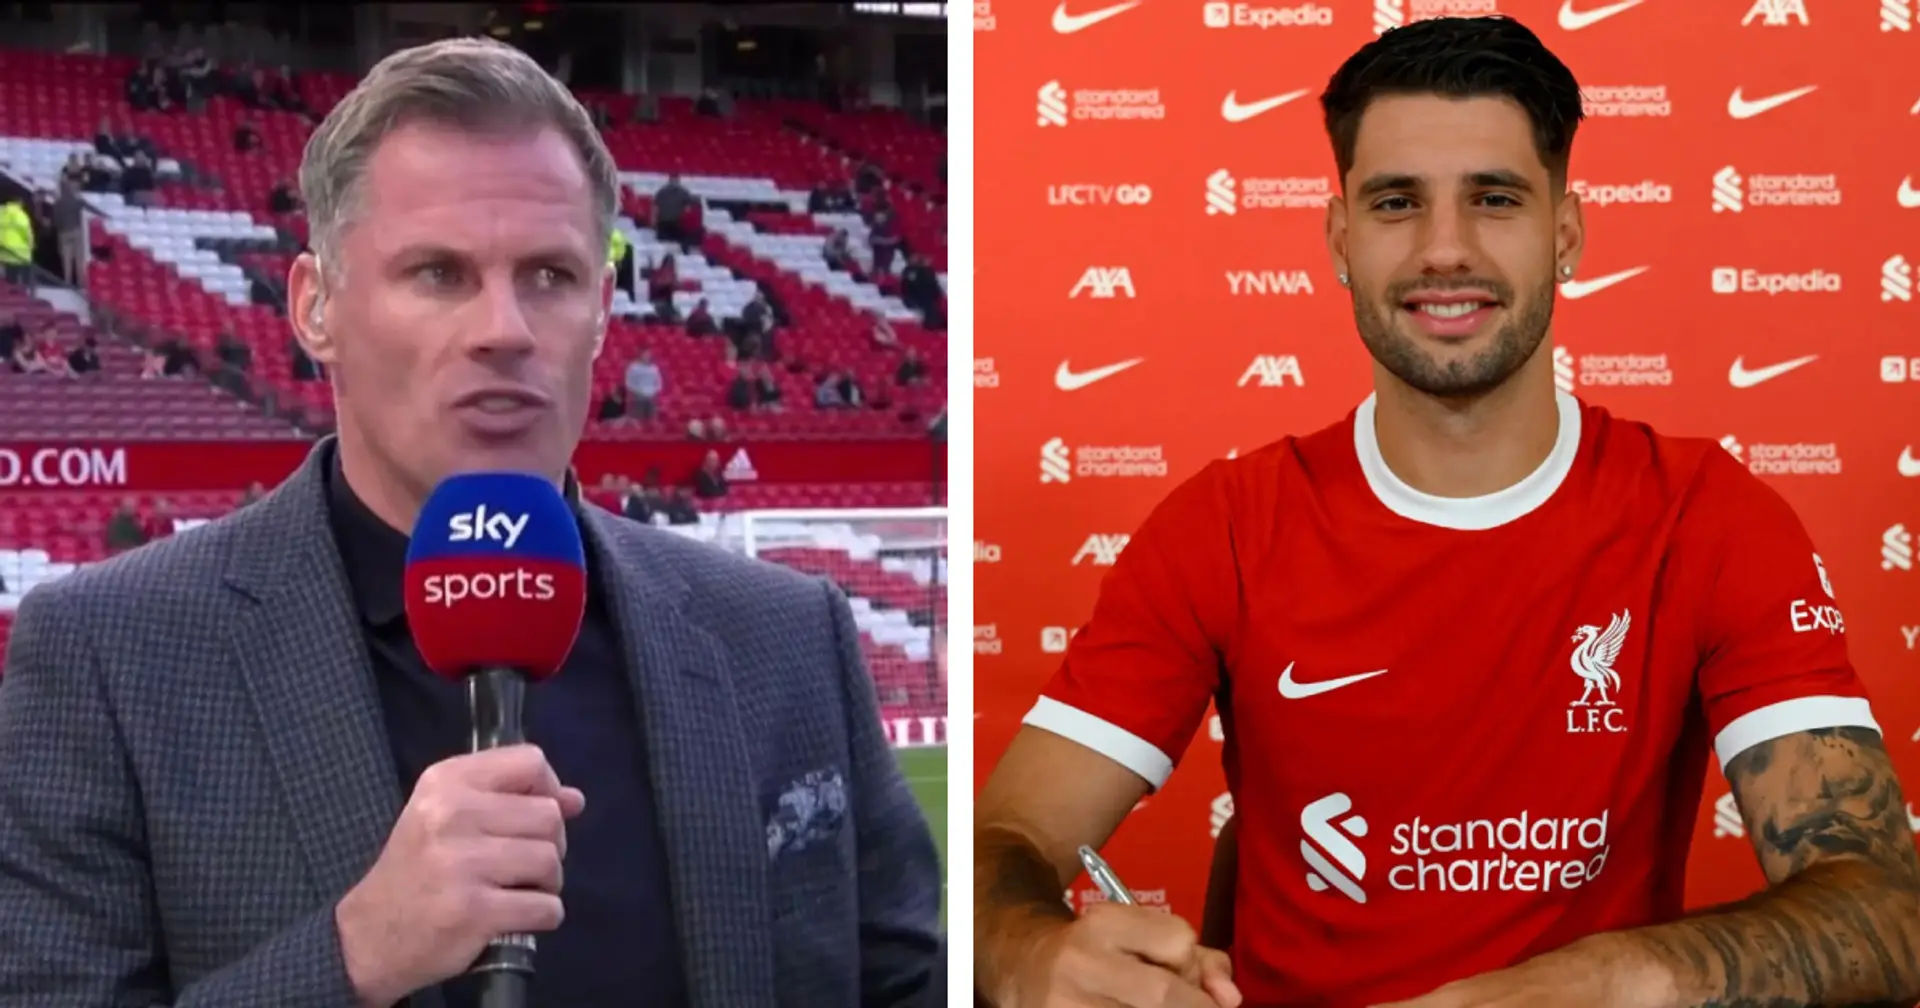 Jamie Carragher wanted Liverpool to sign 3 players this summer: 2 down, one to go